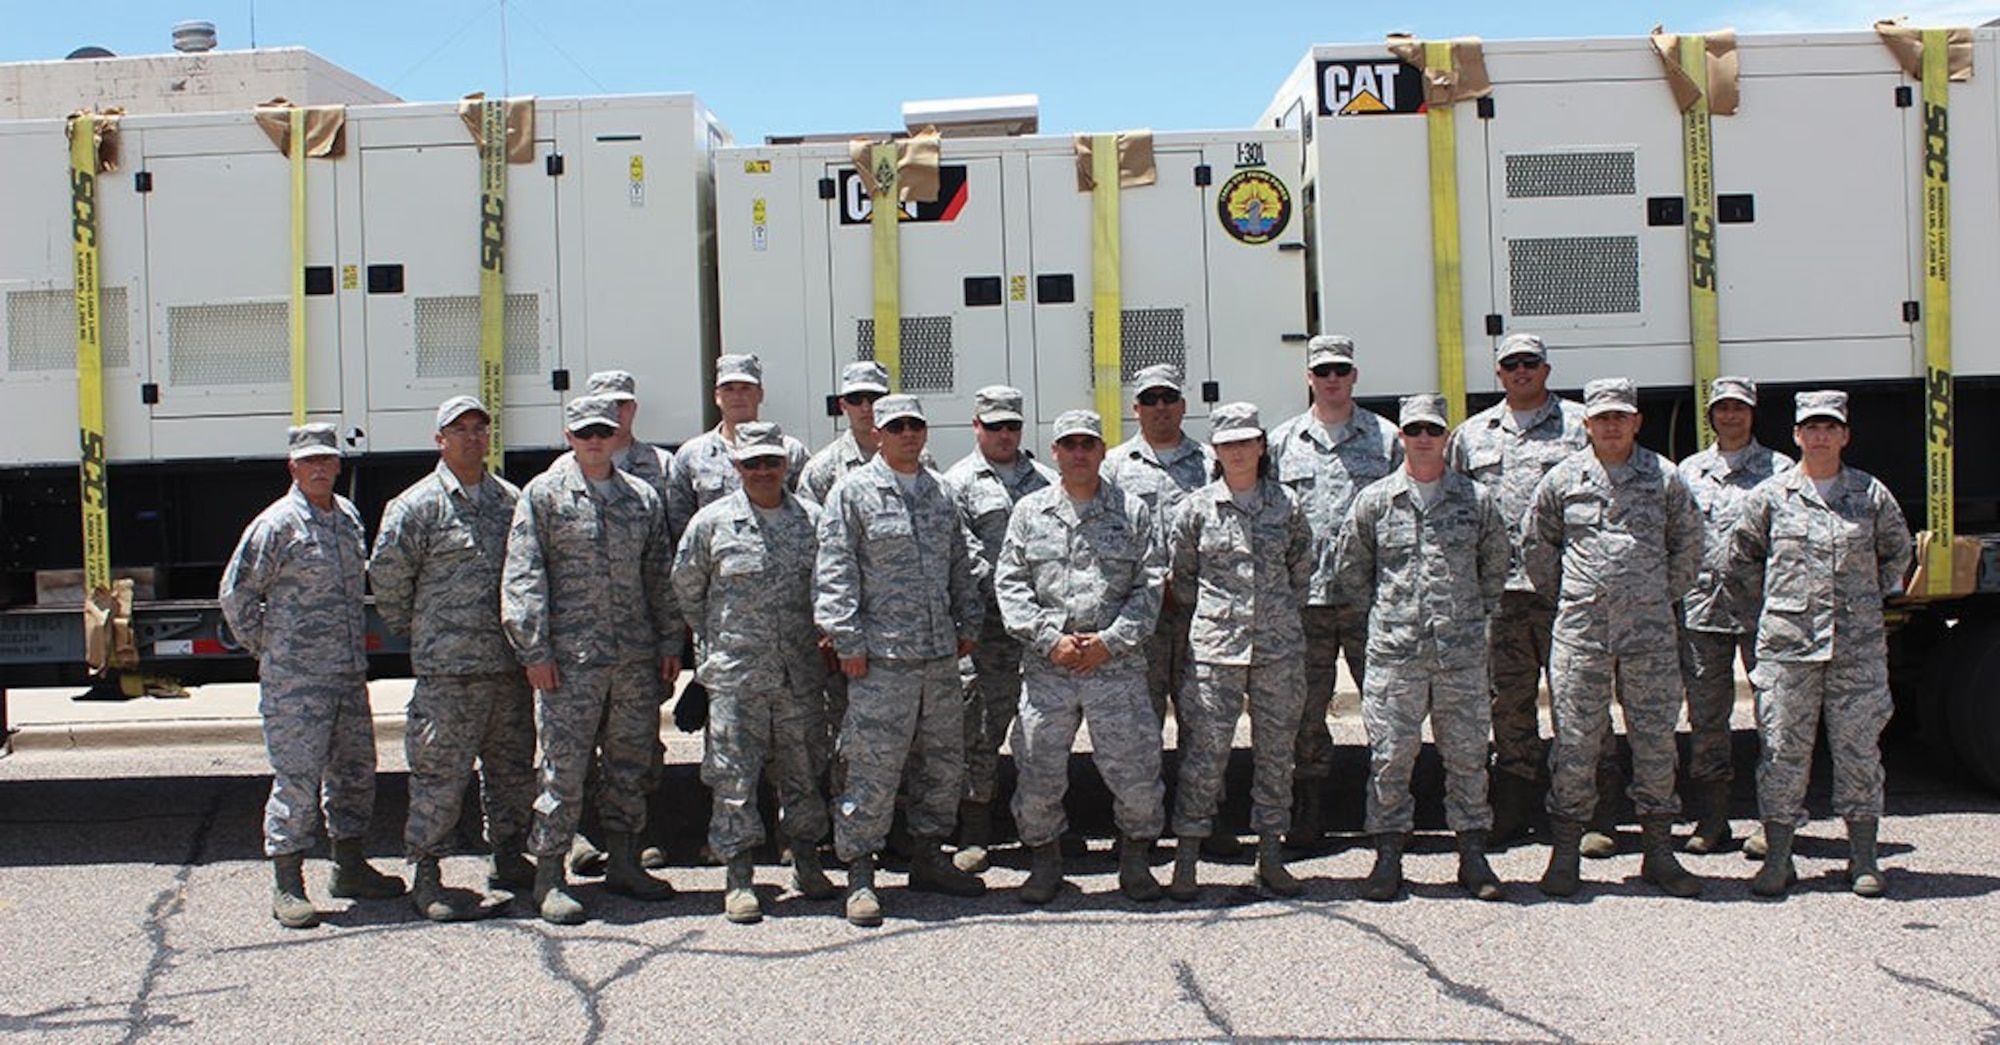 Members of the Air National Guard 150th Special Operations Wing Prime Power unit from Kirtland Air Force Base pose with some of their generators after returning Monday from a training exercise in Wisconsin. They convoyed for more than 1,400 miles to participate in the national exercise, practicing for helping with disaster relief at the far reaches of their response area. (Photo by Bud Cordova)
